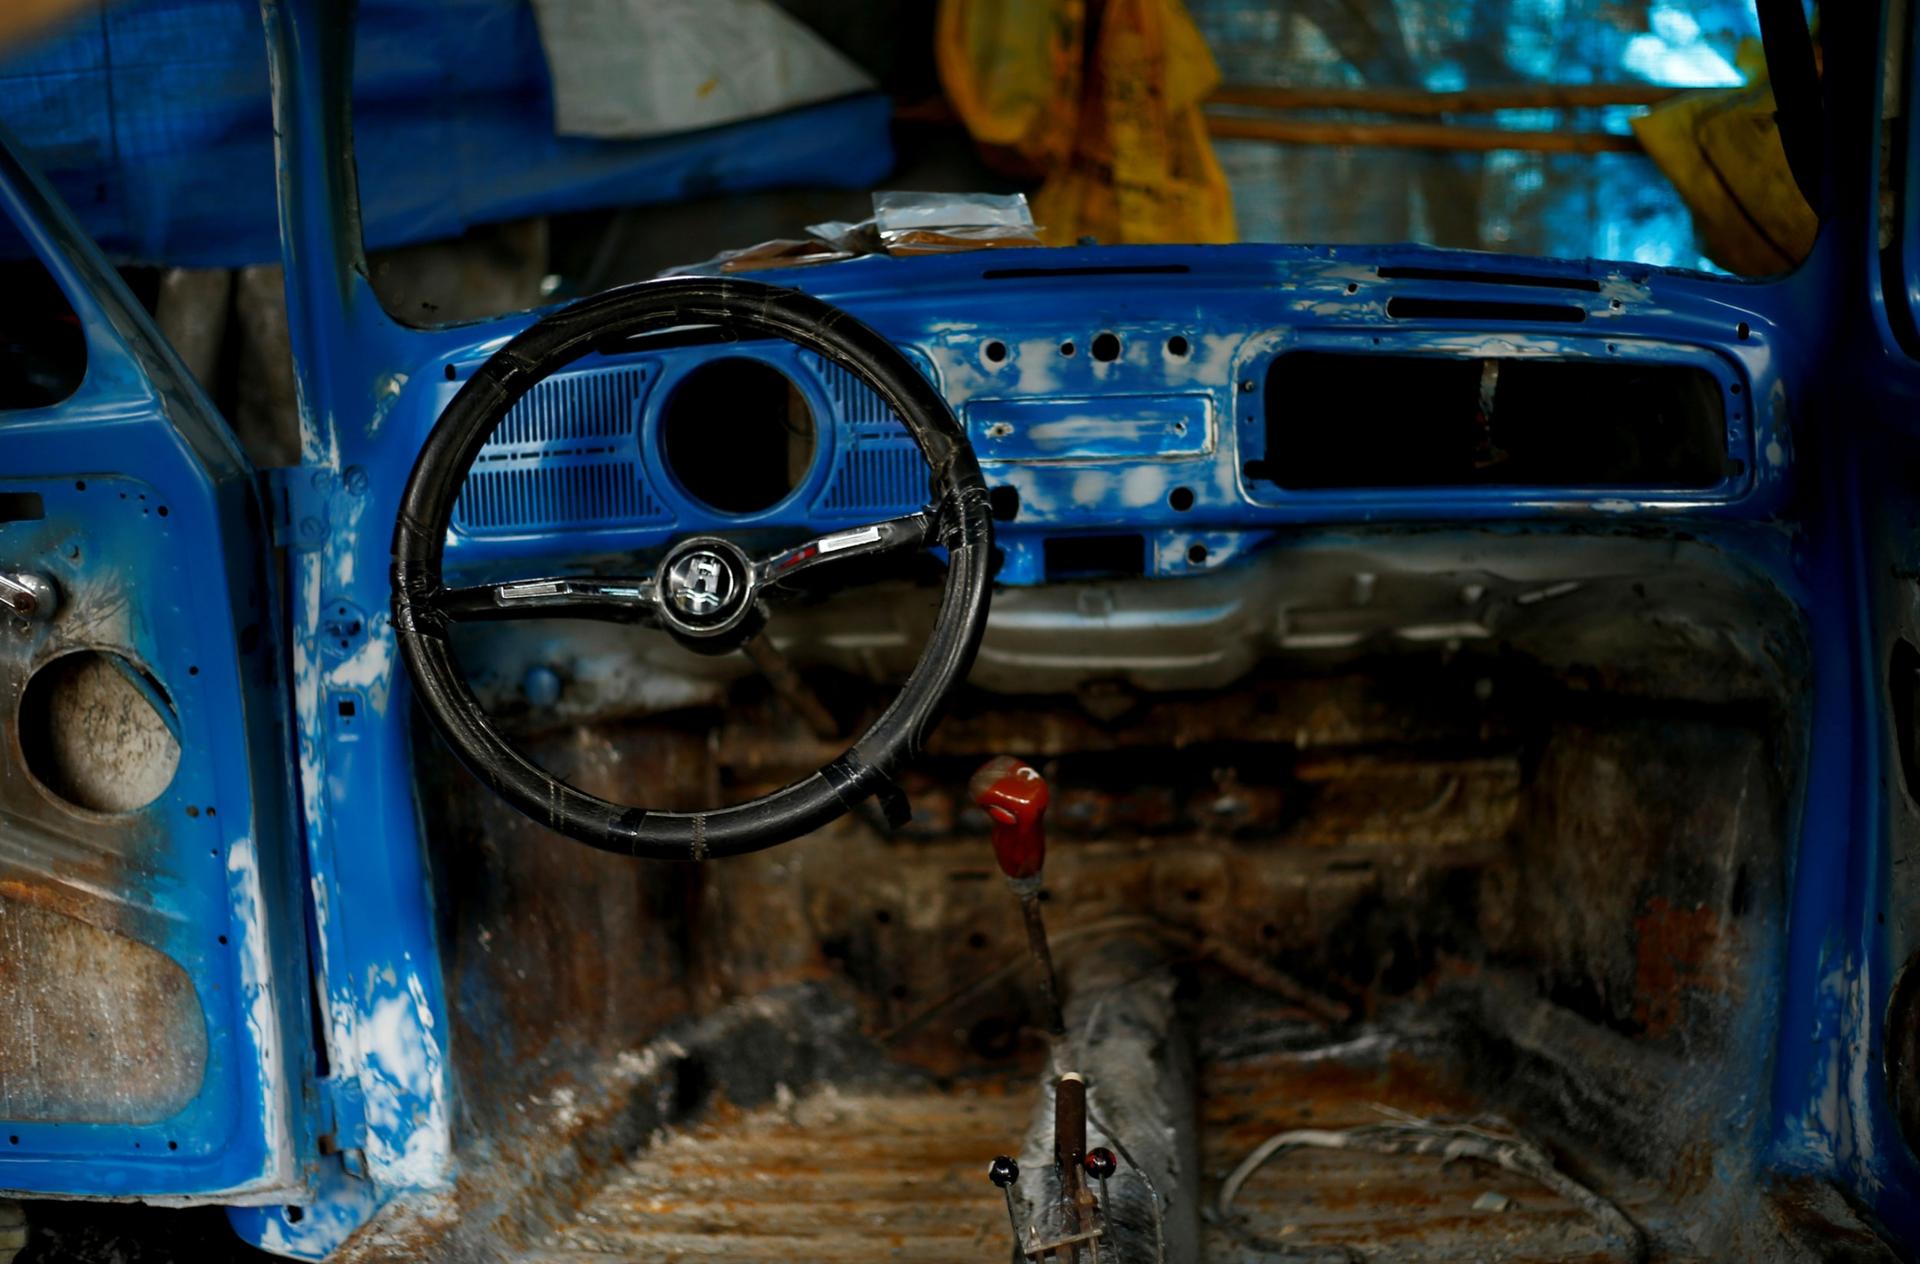 The blue, stripped down interior of a Volkswagen Beetle car is shown along with a black steering wheel.